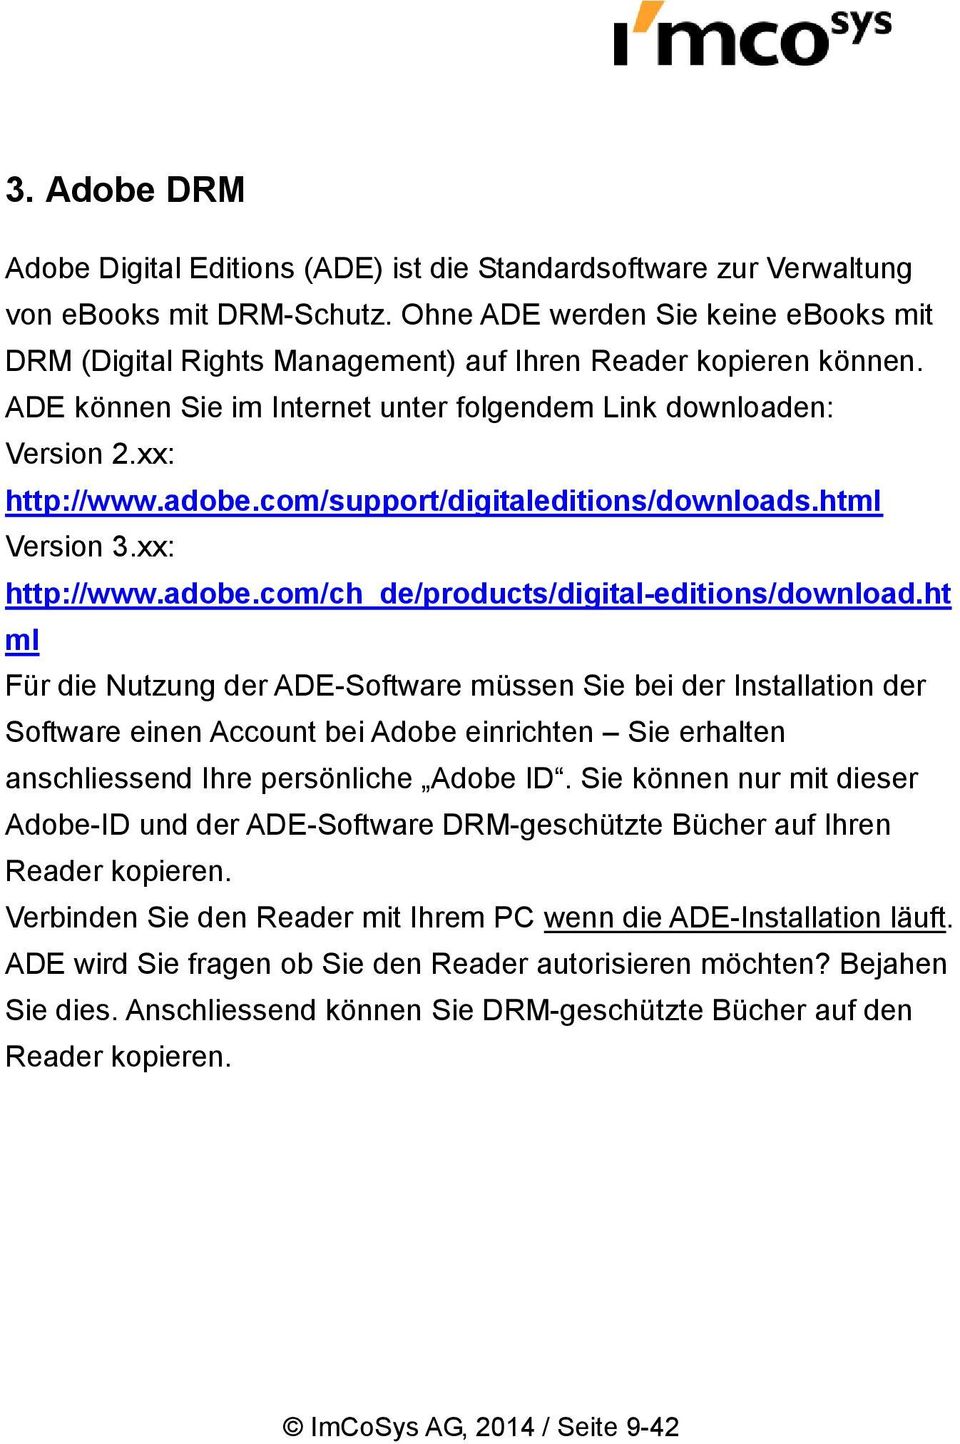 com/support/digitaleditions/downloads.html Version 3.xx: http://www.adobe.com/ch_de/products/digital-editions/download.